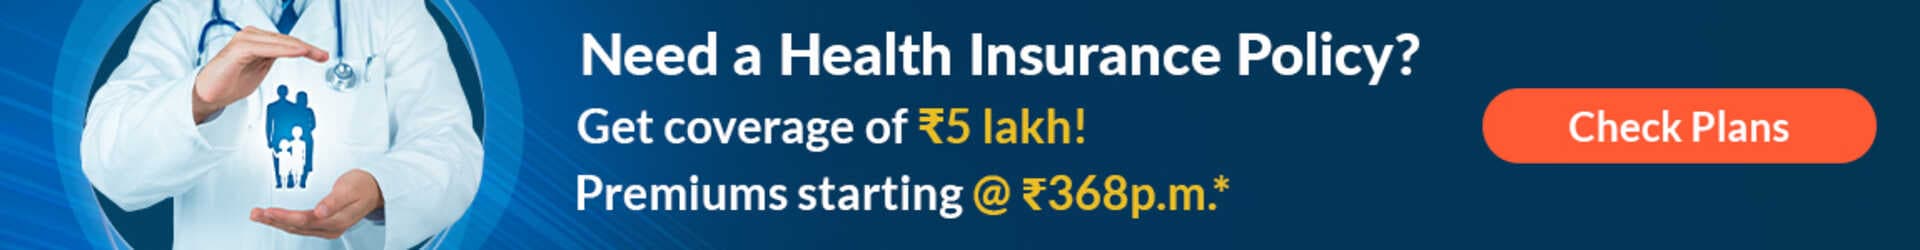 apply health insurance now